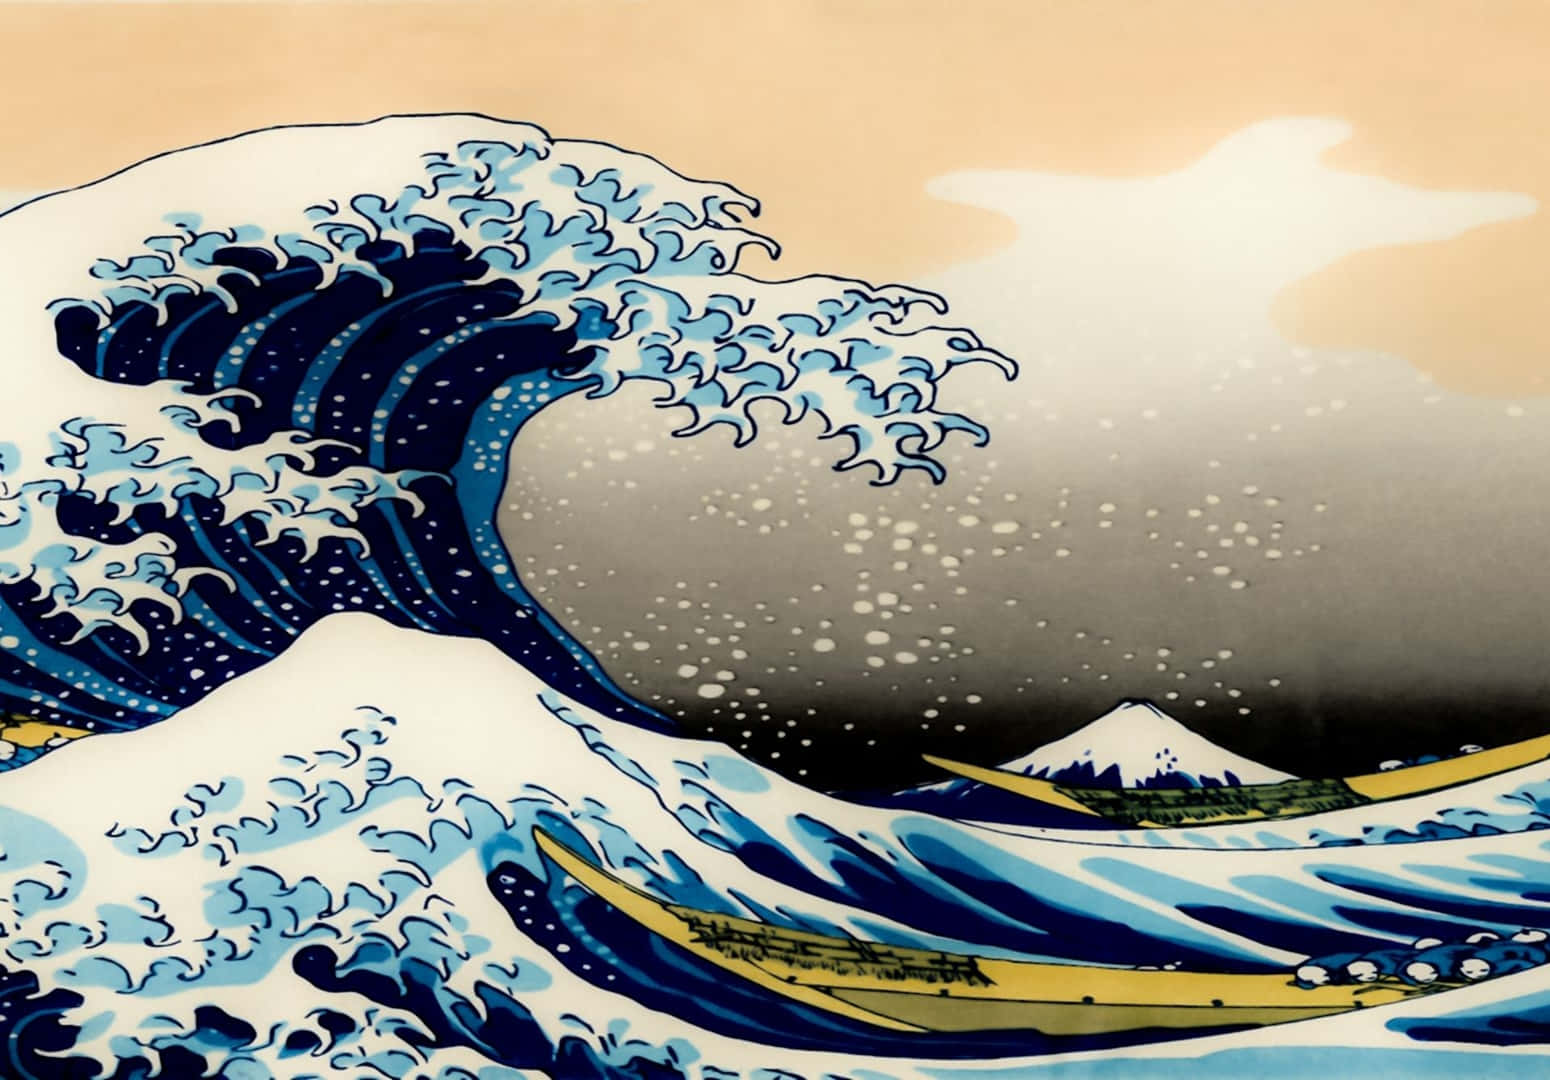 Download The Great Wave Digital Painting Wallpaper